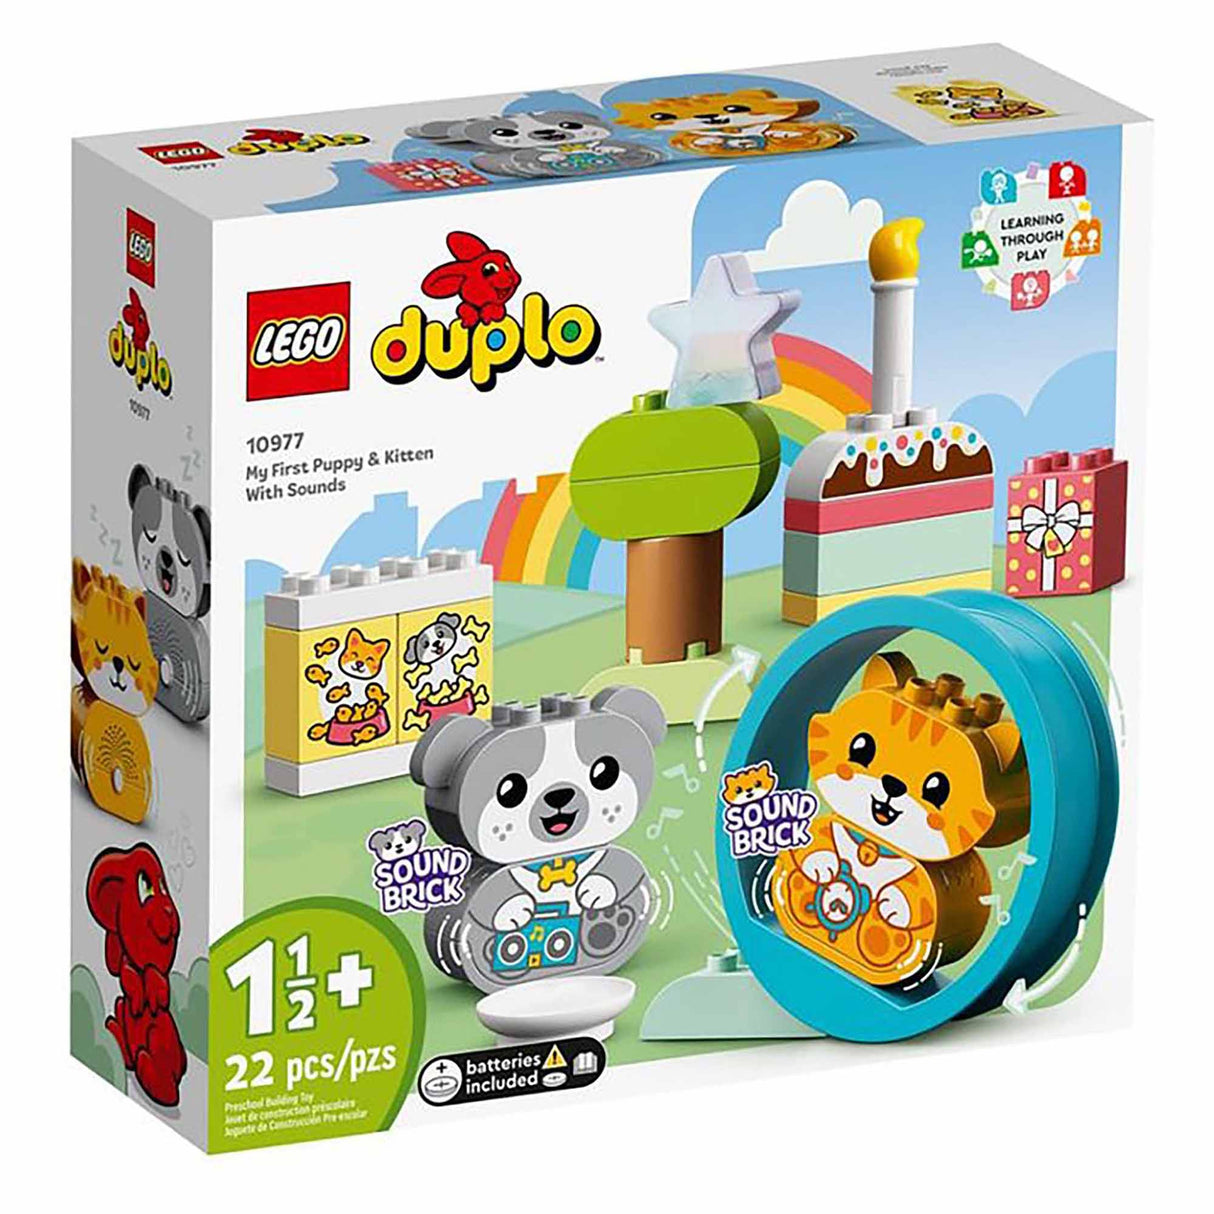 LEGO 10977 DUPLO My First Puppy and Kitten with Sounds (22 pieces)